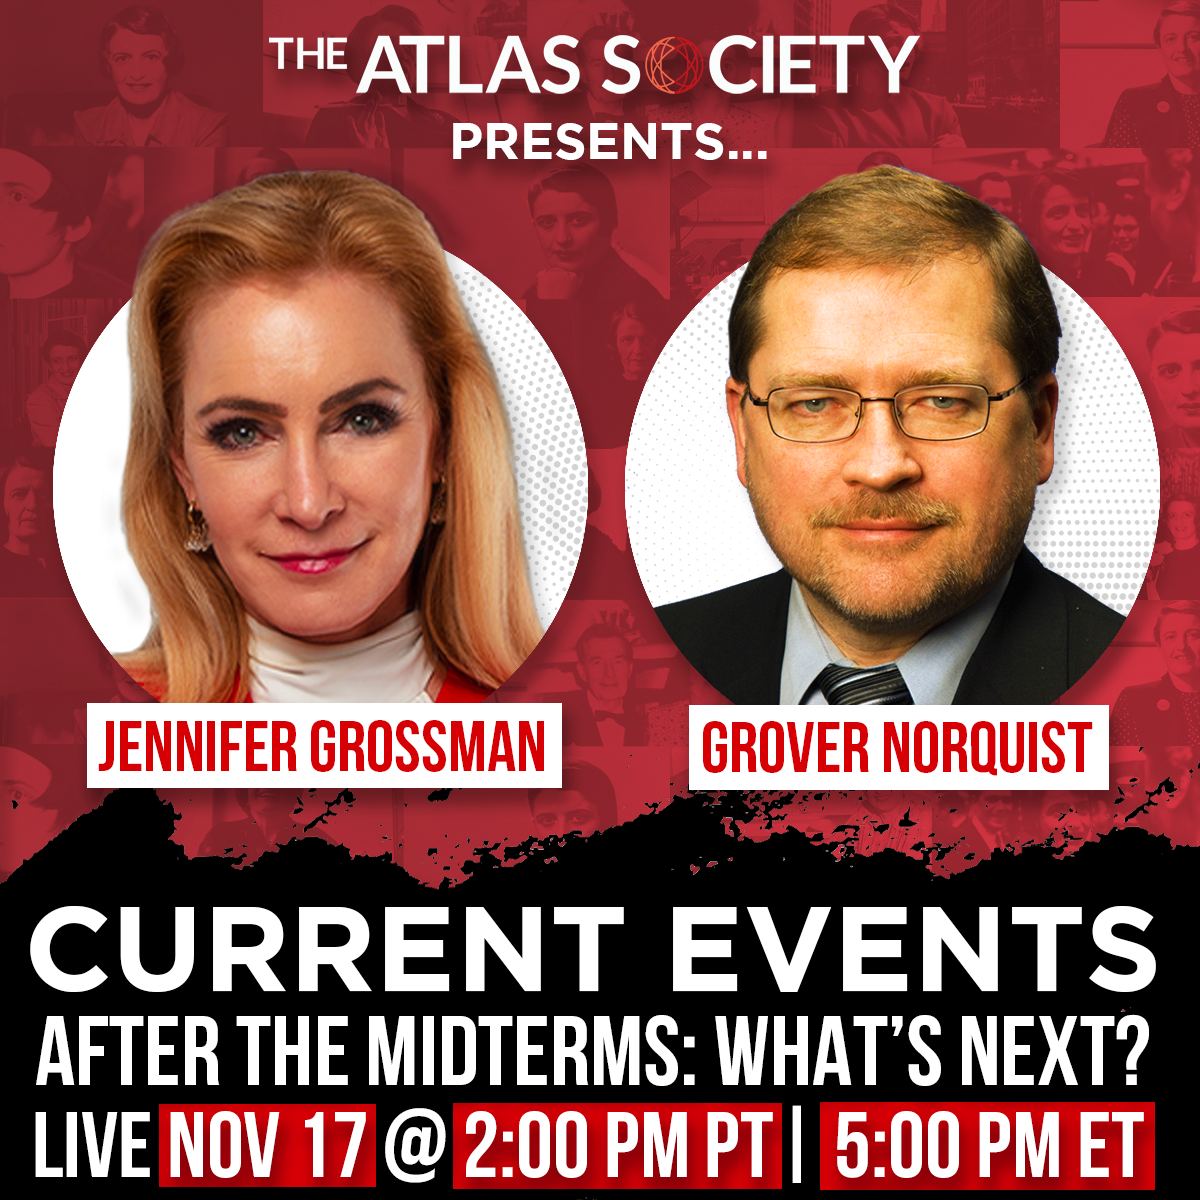 After the Midterms: What's Next? with Grover Norquist